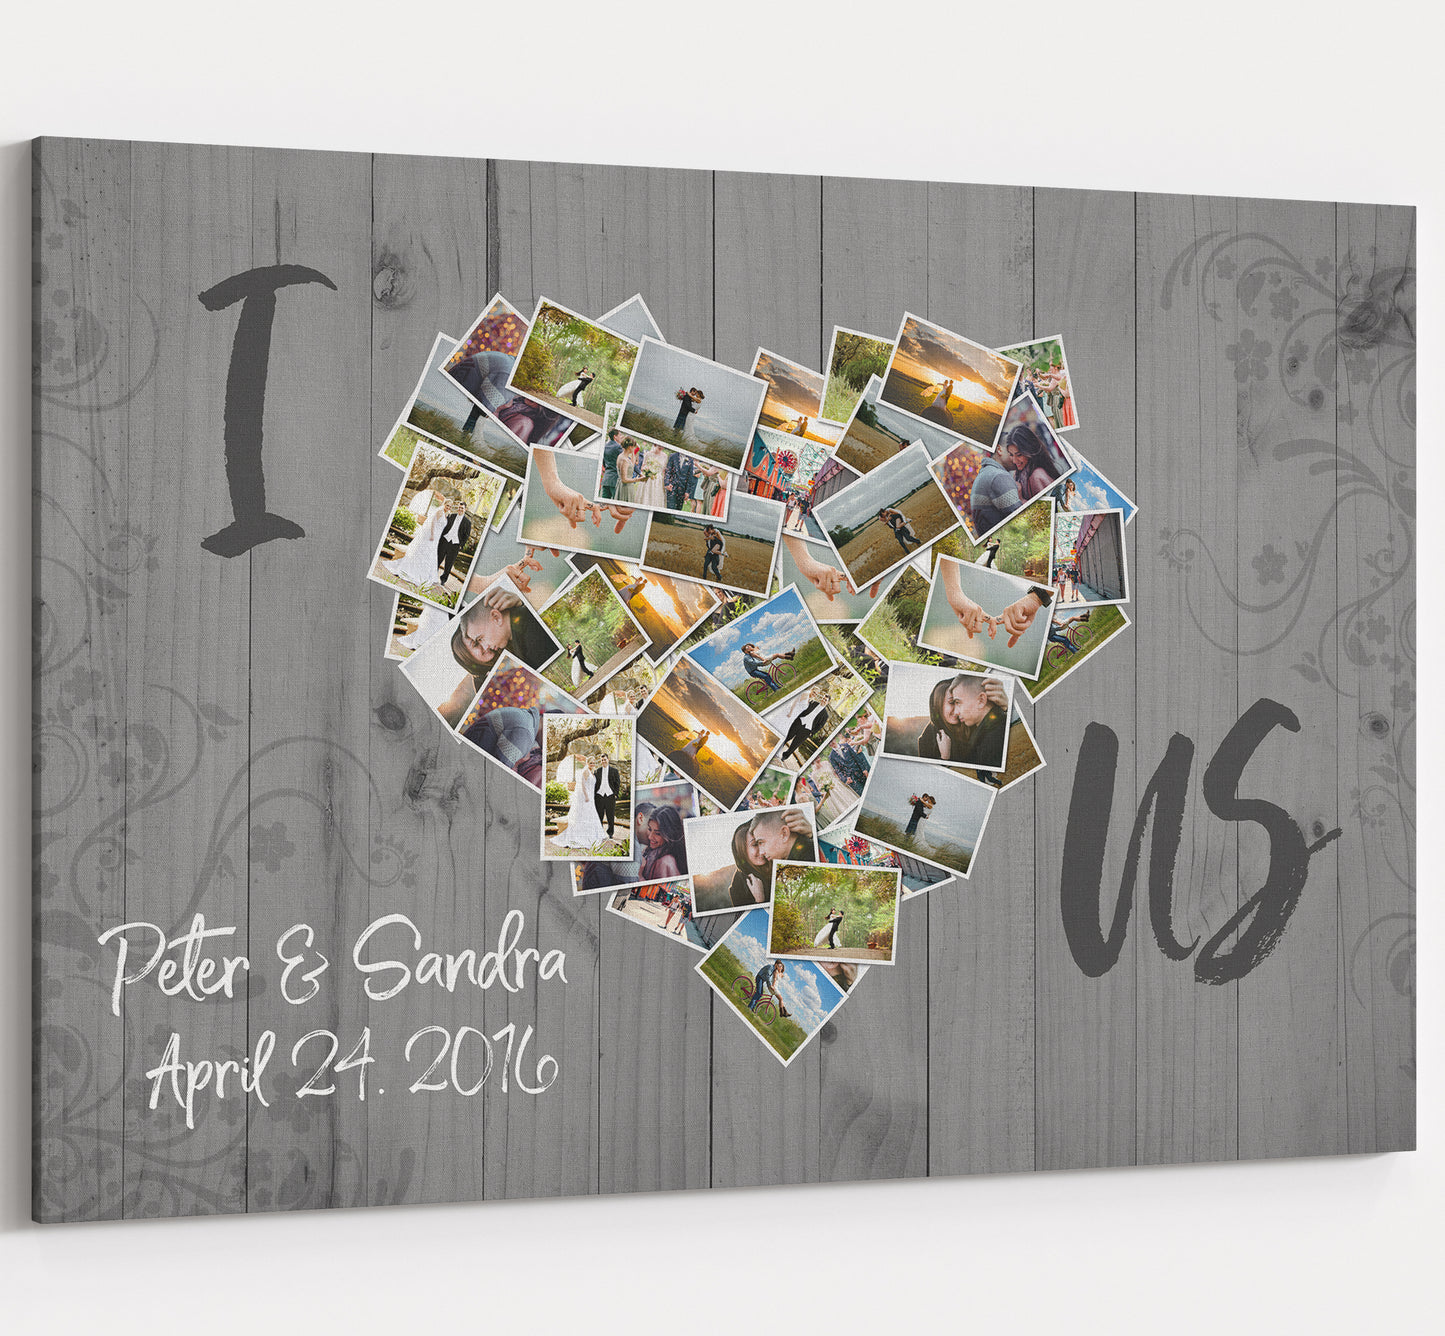 I Love Us - Photos of Us Collage Canvas Custom Personalized Wall Art